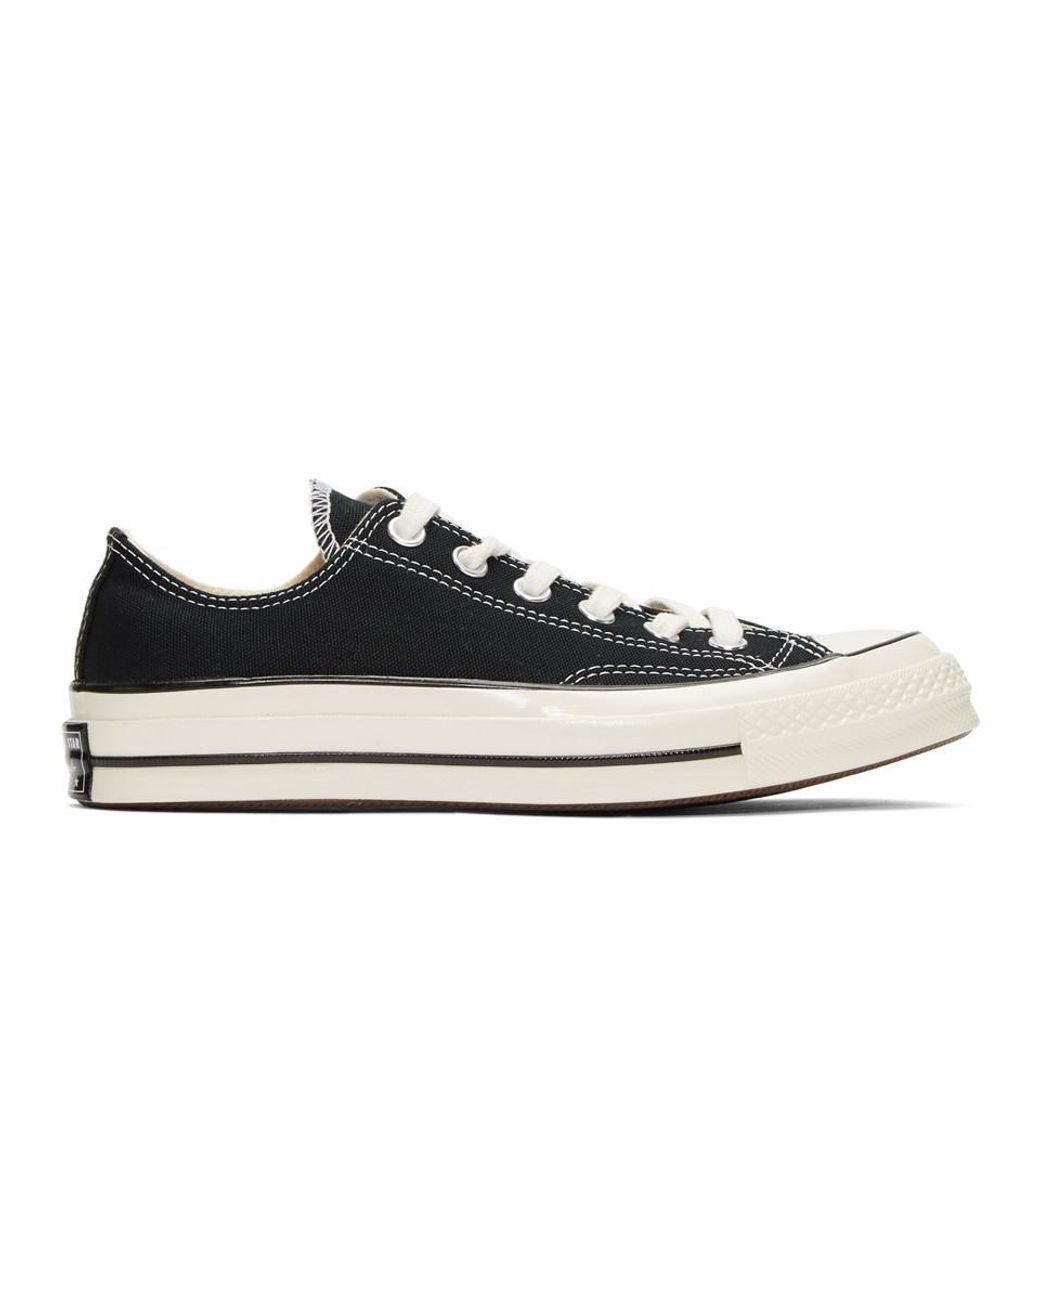 Converse Canvas Black Chuck 70 Low Sneakers for Men - Lyst